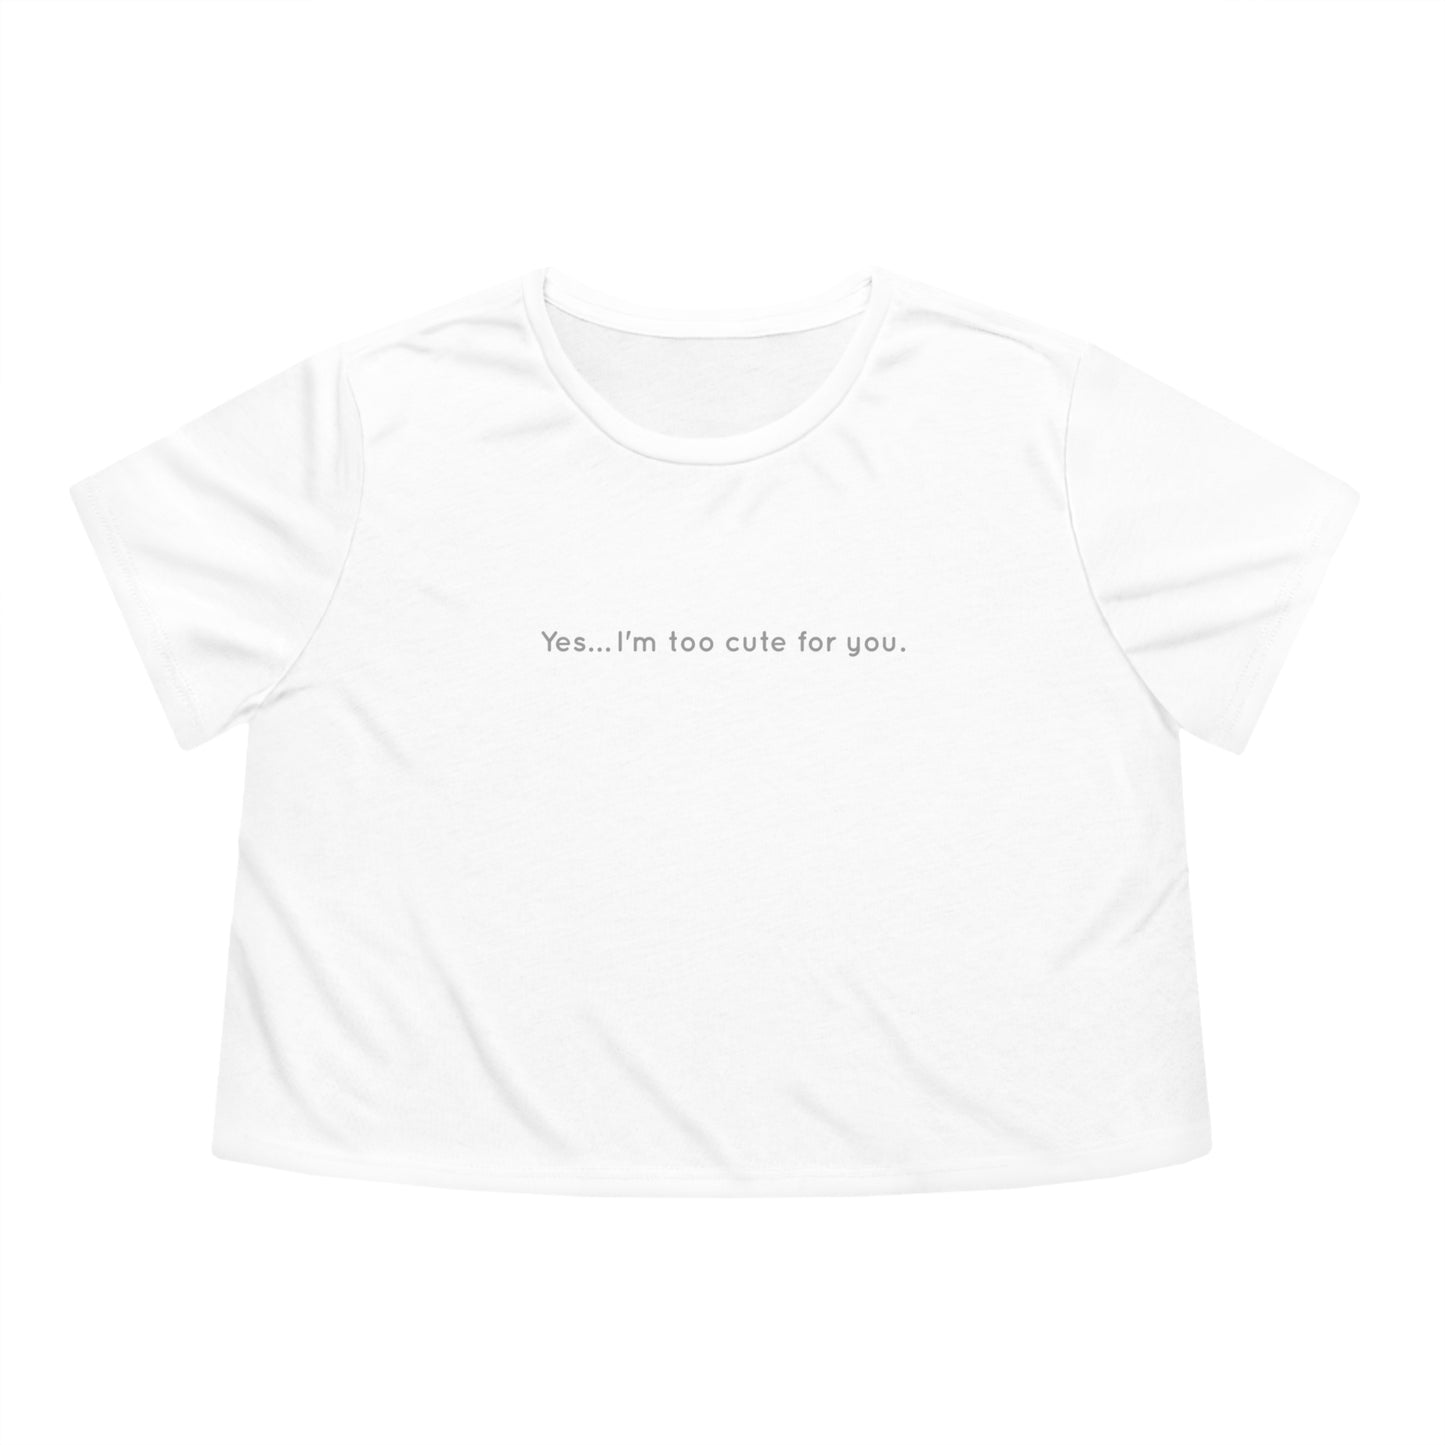 "Yes… I'm too cute for you" - Cropped Tee